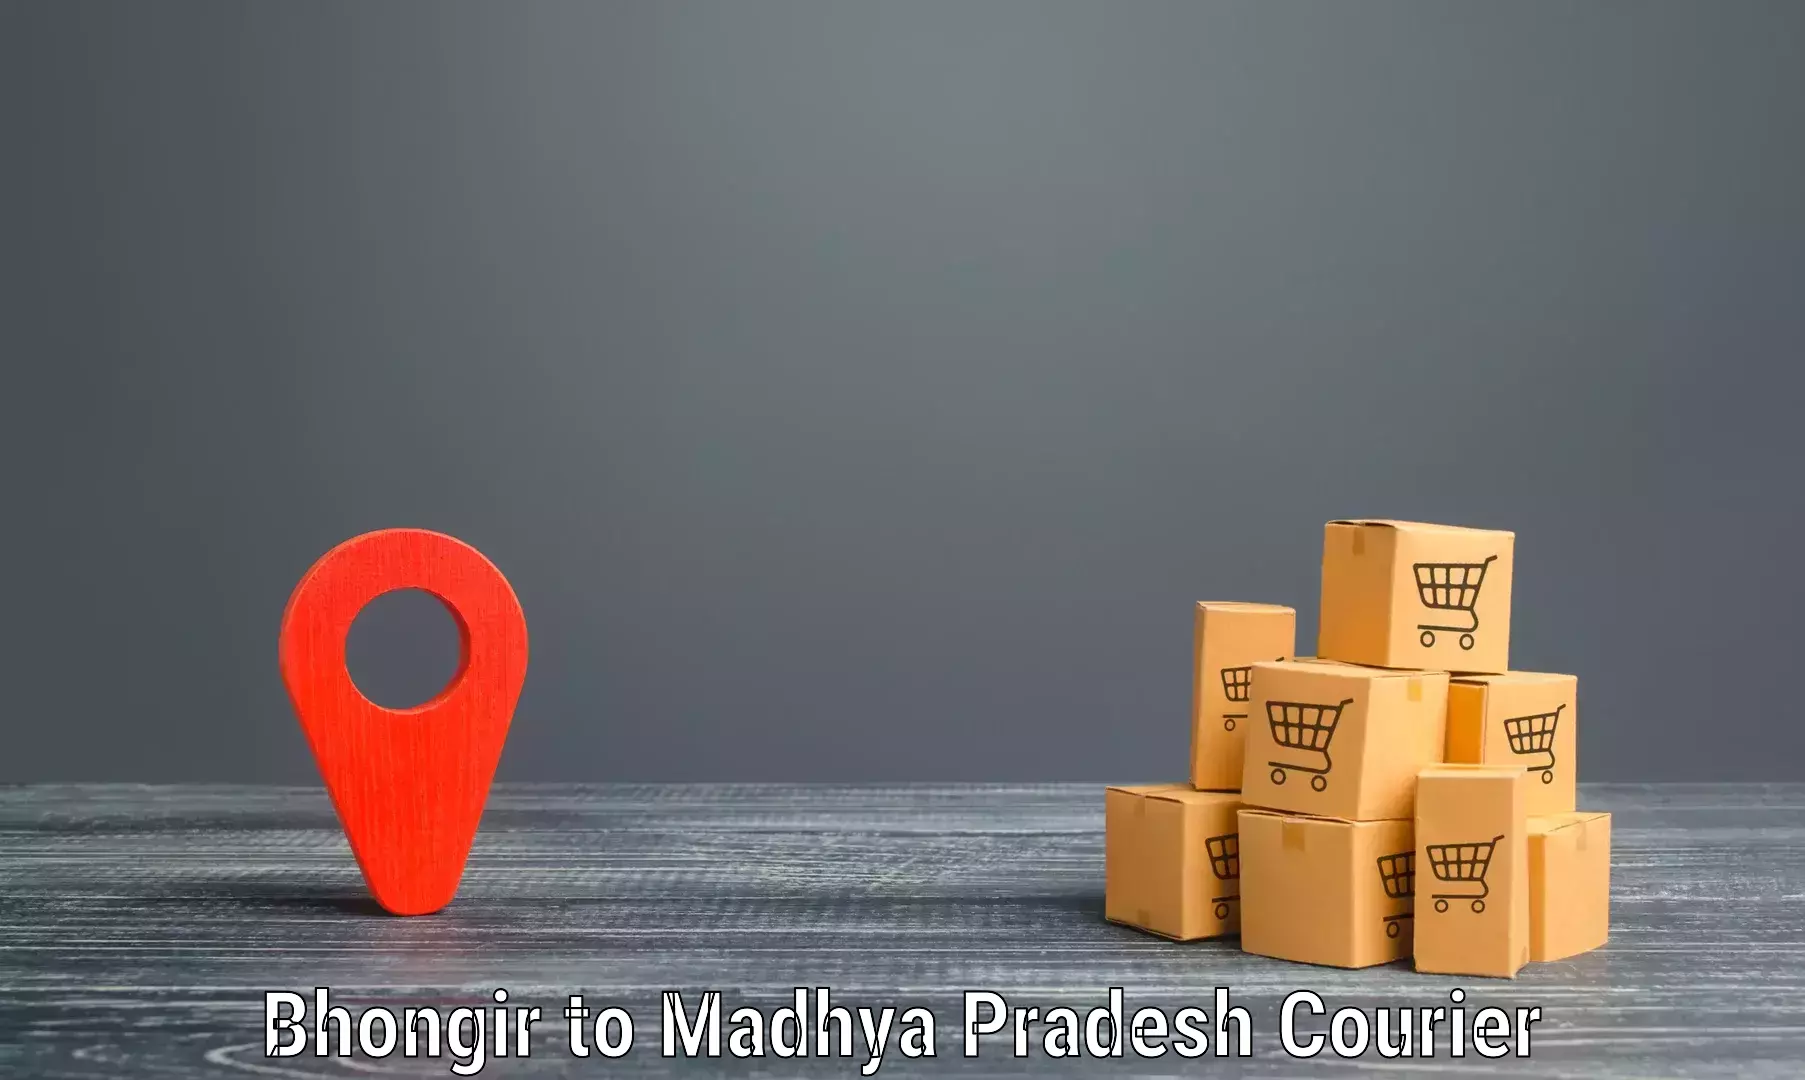 Overnight delivery services Bhongir to Khandwa